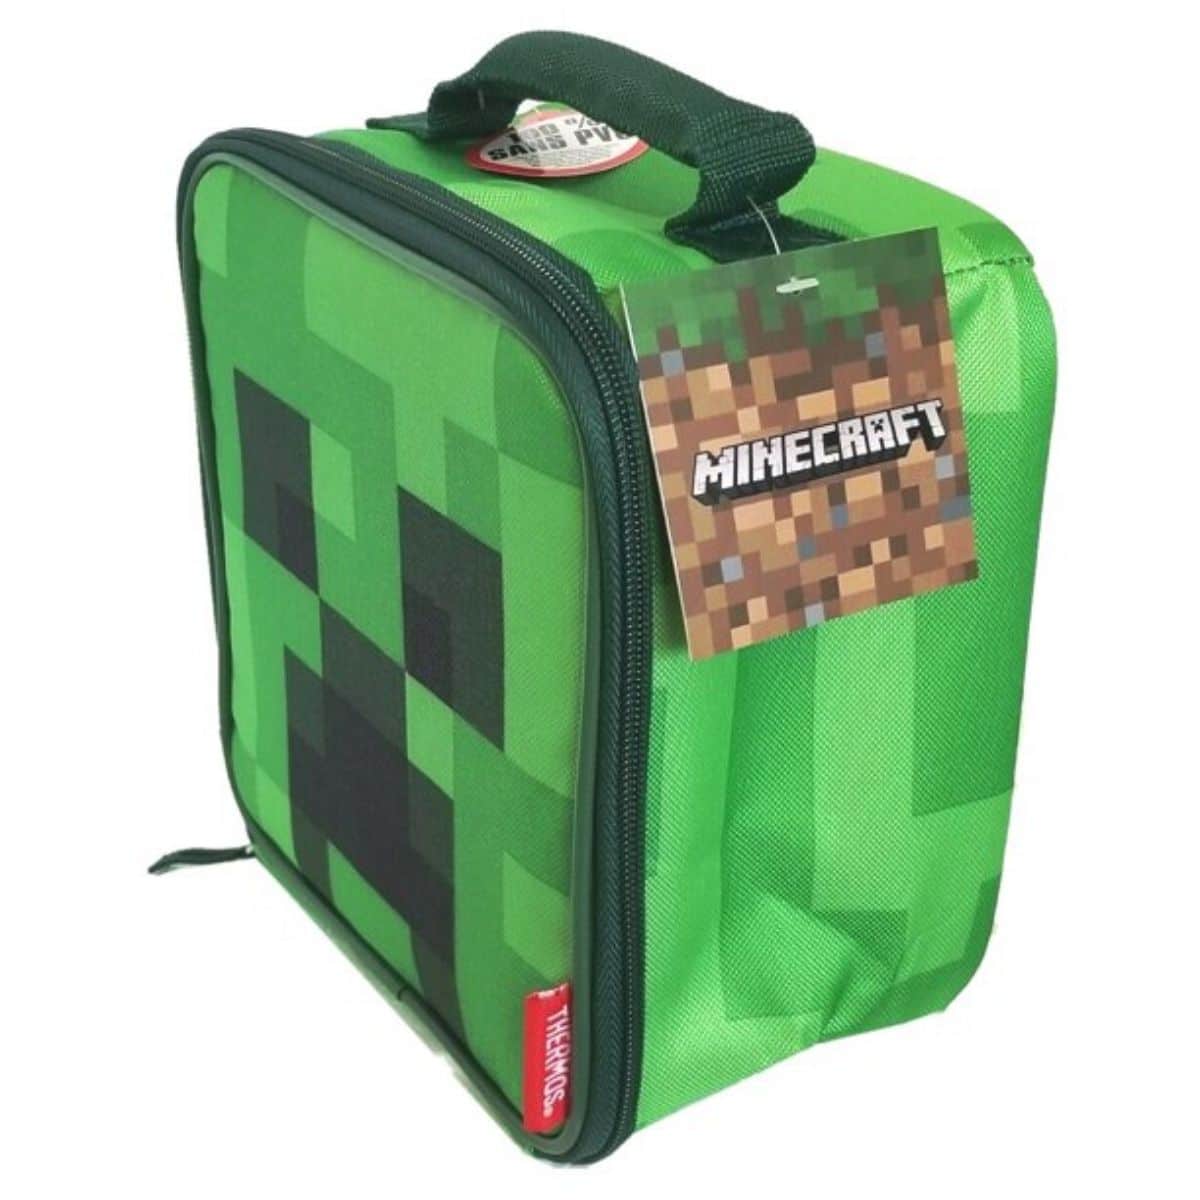 https://babyaccesorios.com/wp-content/uploads/2021/08/Thermos-Minecraft-Cube-Tote-Lunch-Box-2.jpg